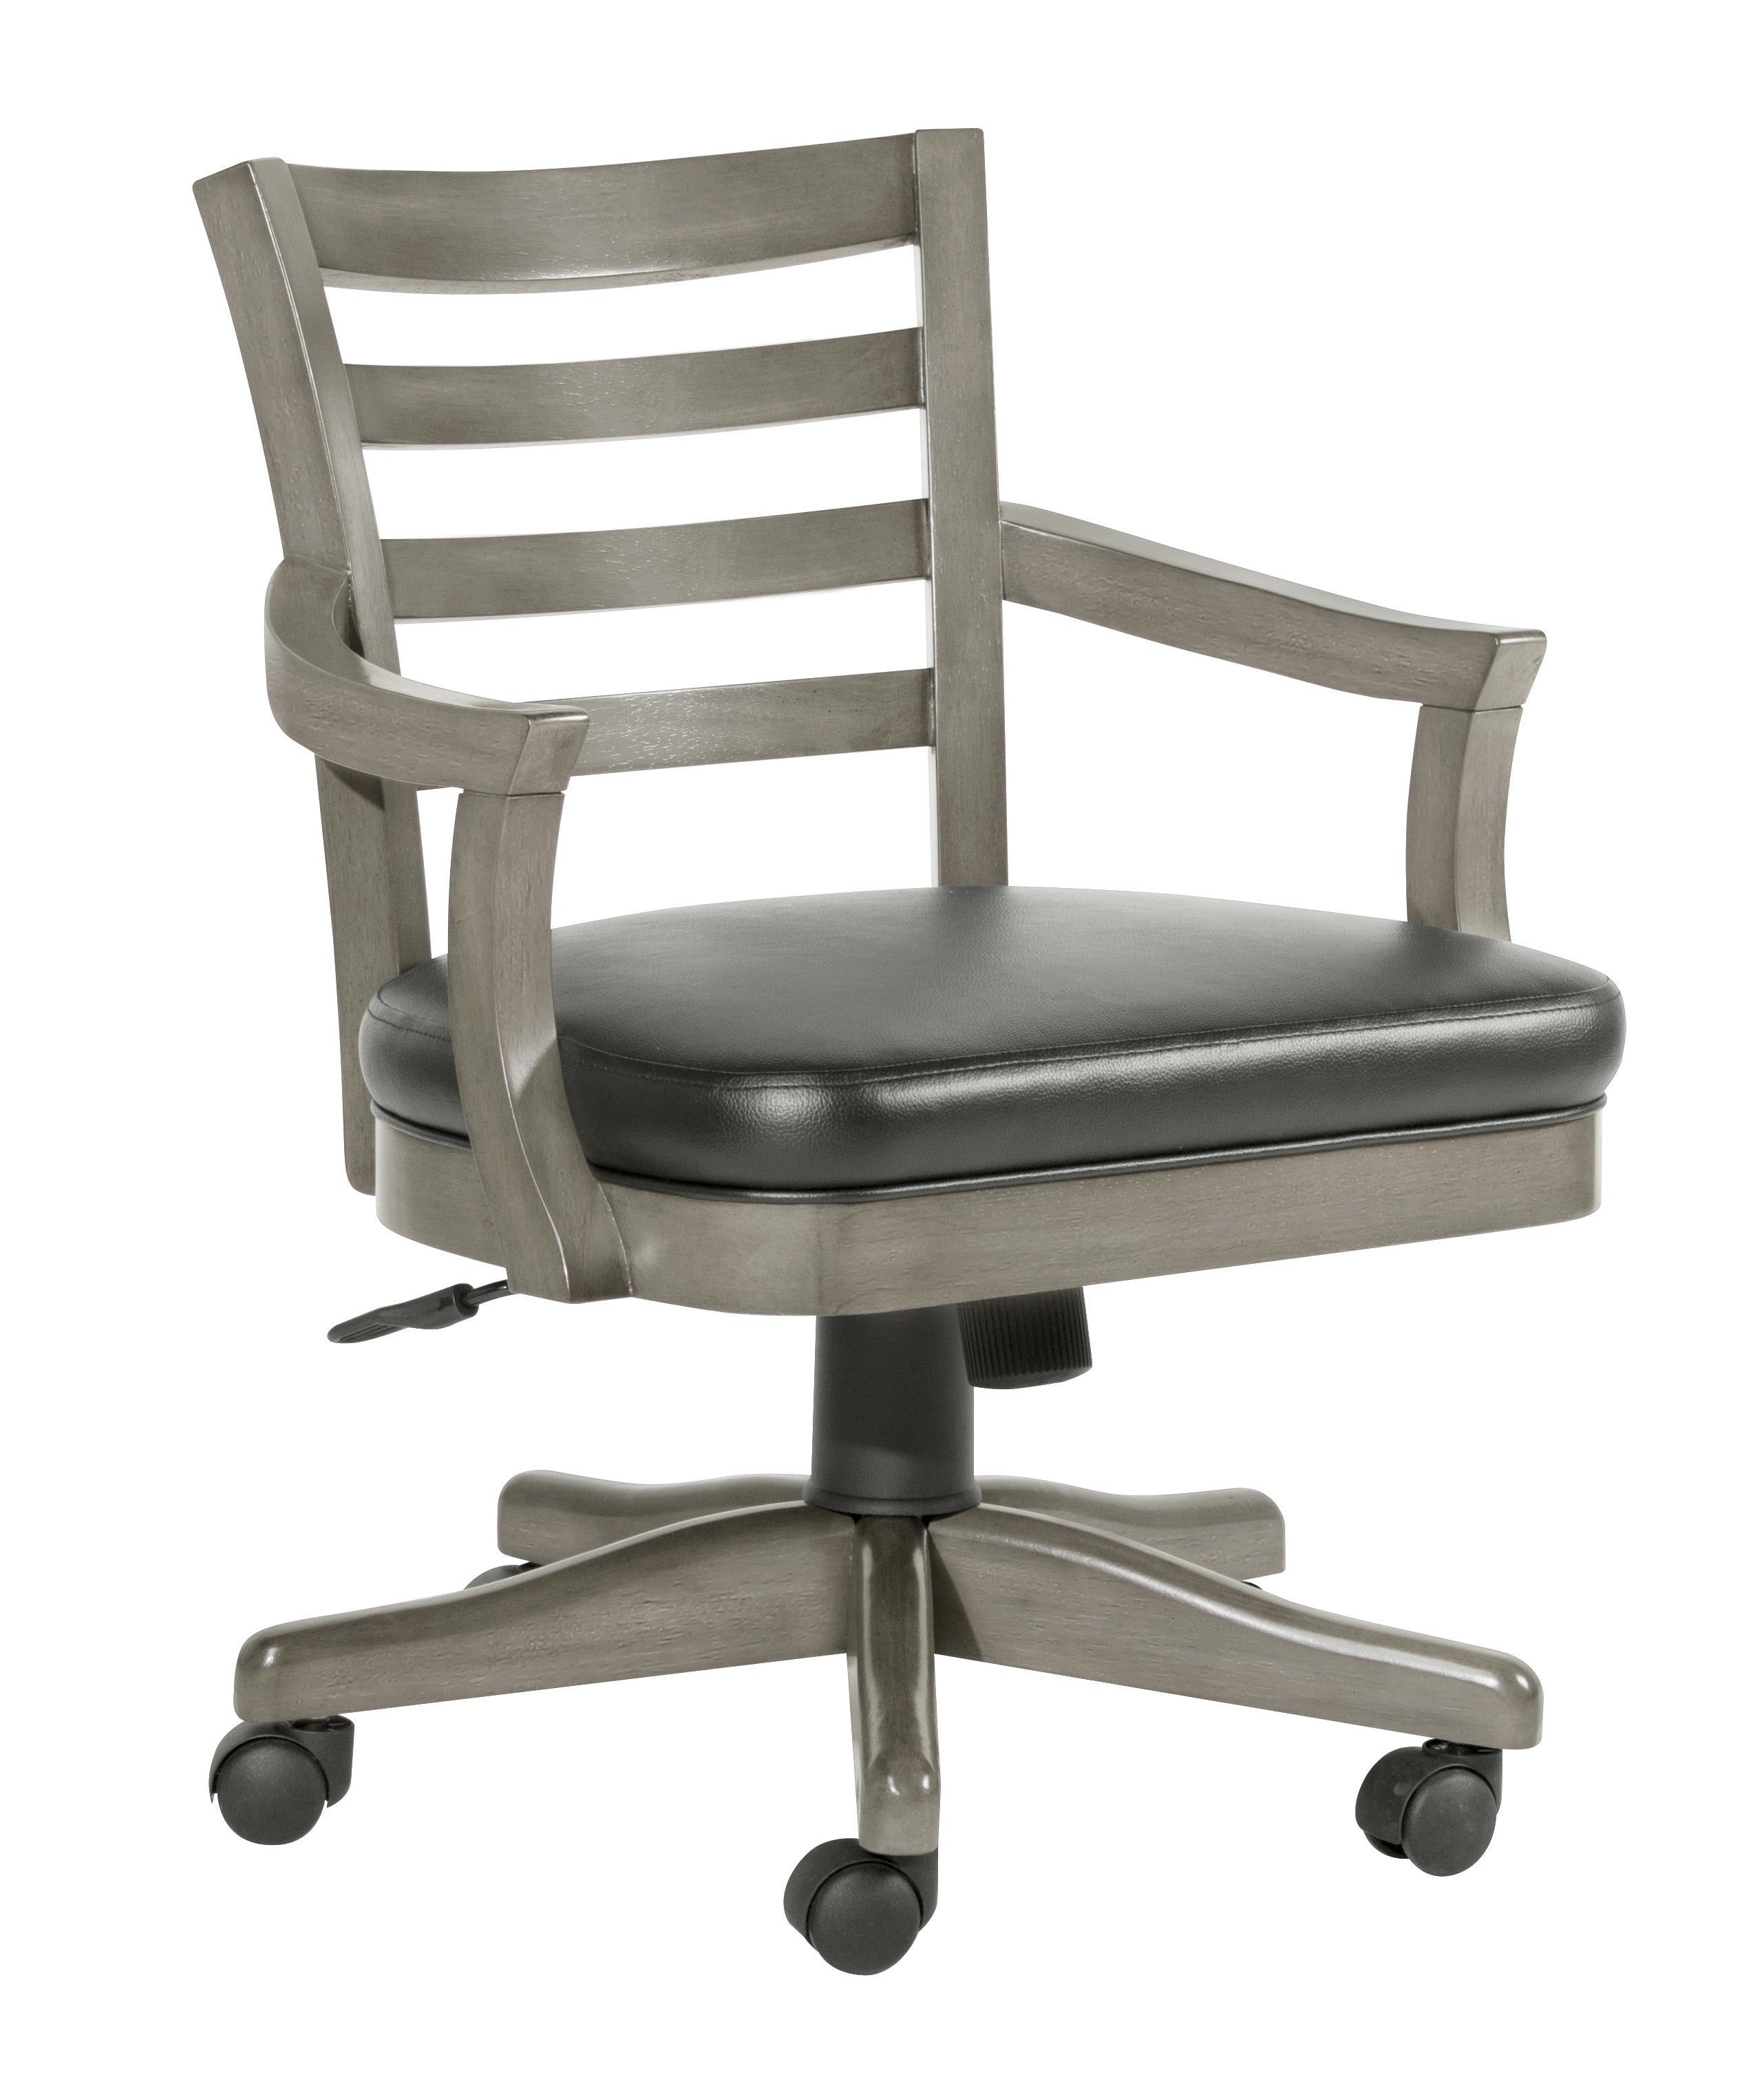 Legacy Billiards Sterling Gas Lift Game Chair in Overcast Finish - Primary Image